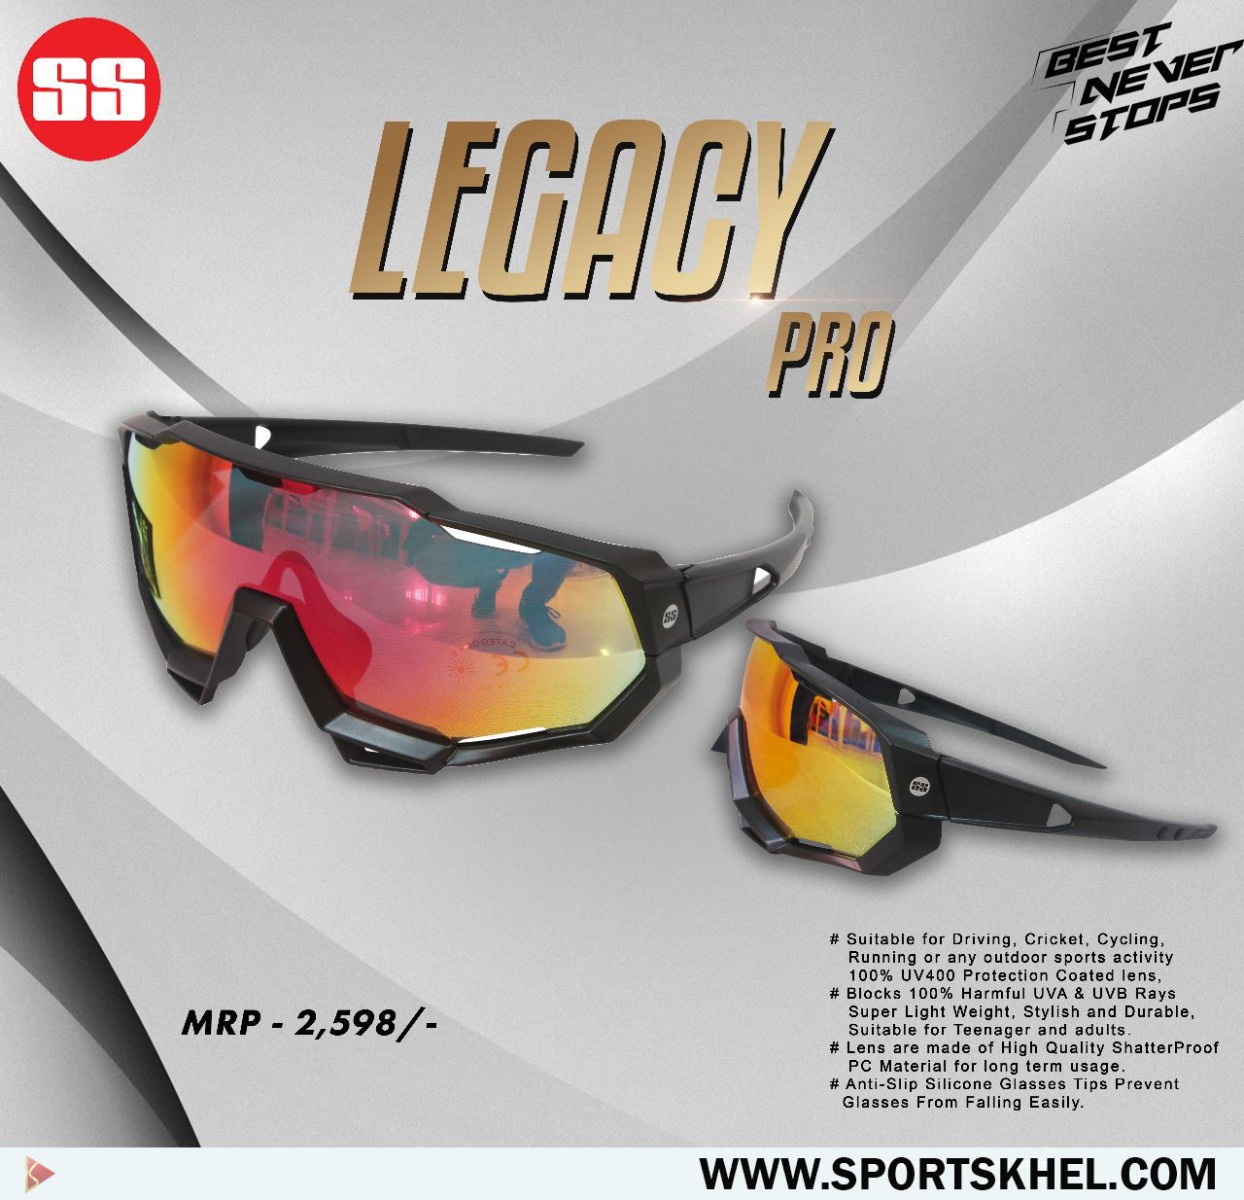 Legacy Pro Black Frame SS Glass Feature Image 1 E